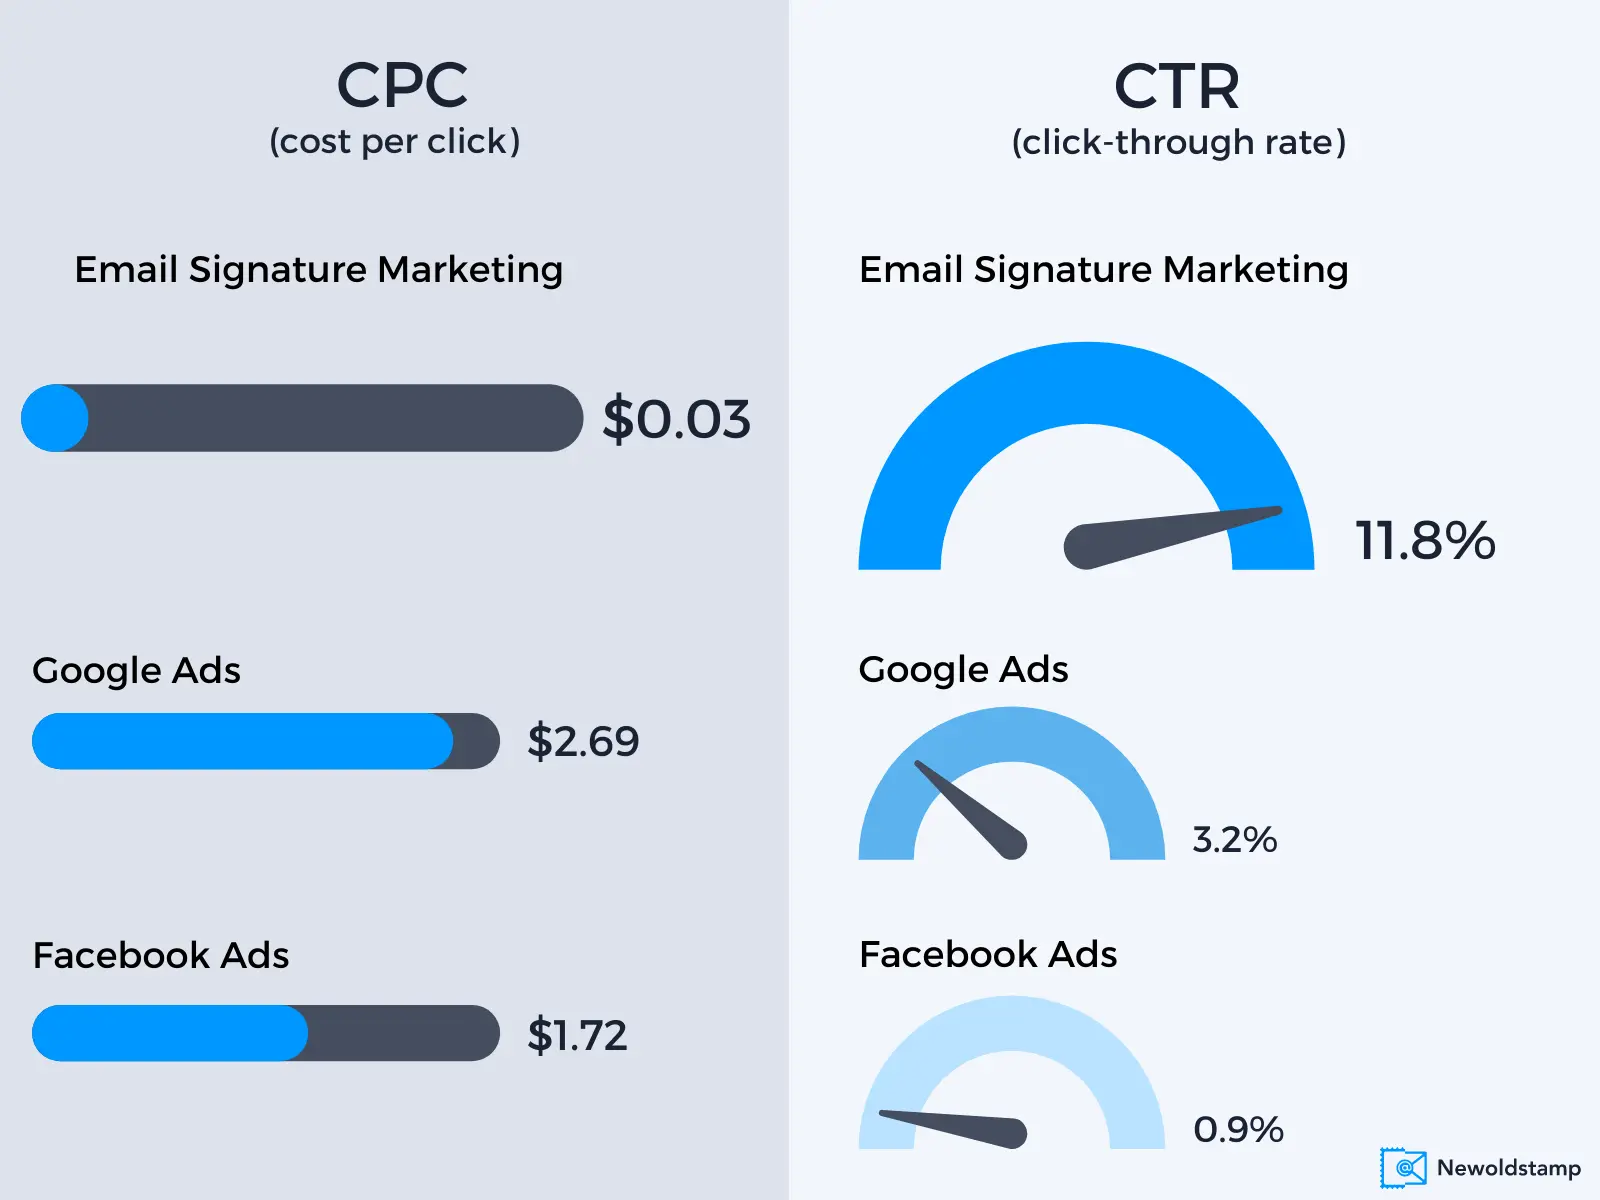 Cost per click is a lot less in email signature marketing